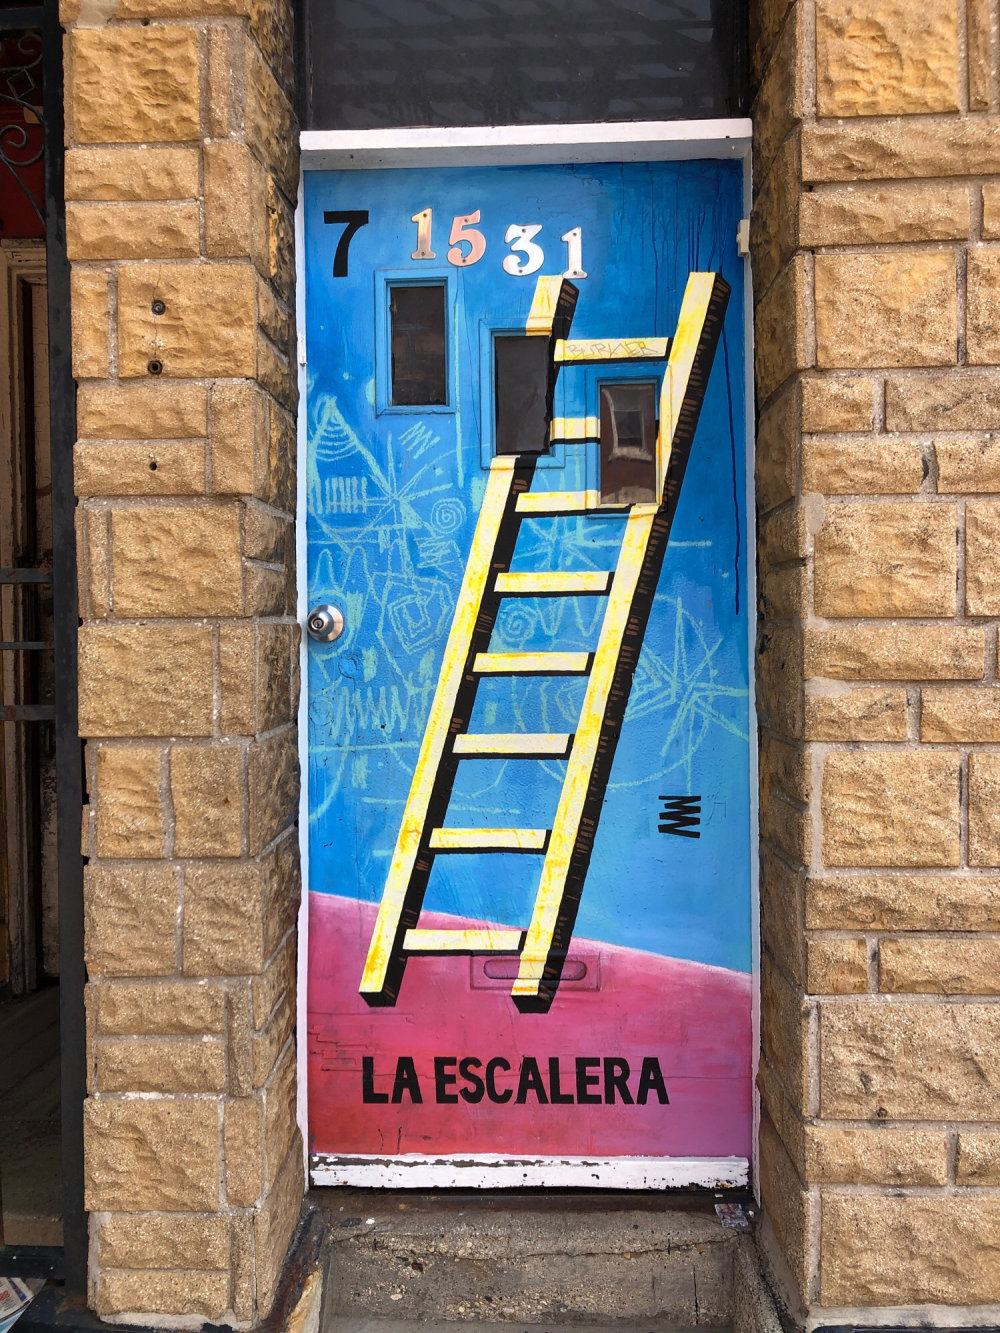 mural in Chicago by artist The Third Man. Tagged: Loteria